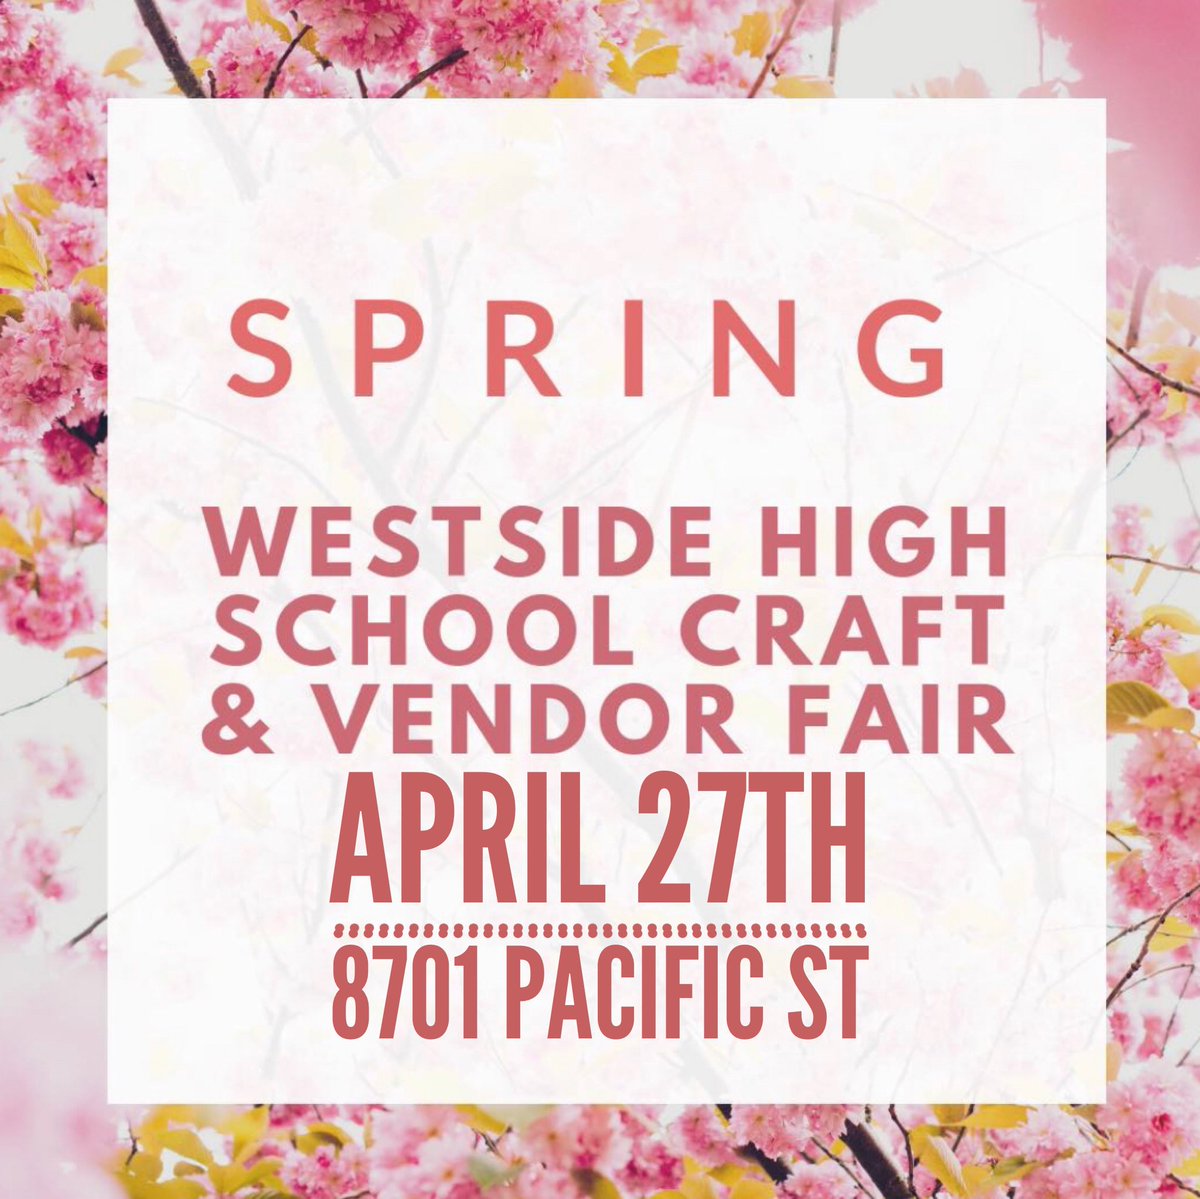 THIS SATURDAY from 9AM to 3PM!  Perfect chance to update your spring decor, find a Mother’s Day, Graduation, or end of the year Teacher Gift! 
#100+Vendors‼️#tennisprogramfundraiser #springshopping #whscraftfair 
@WarriorTennis66 @westsidewired @Westside66